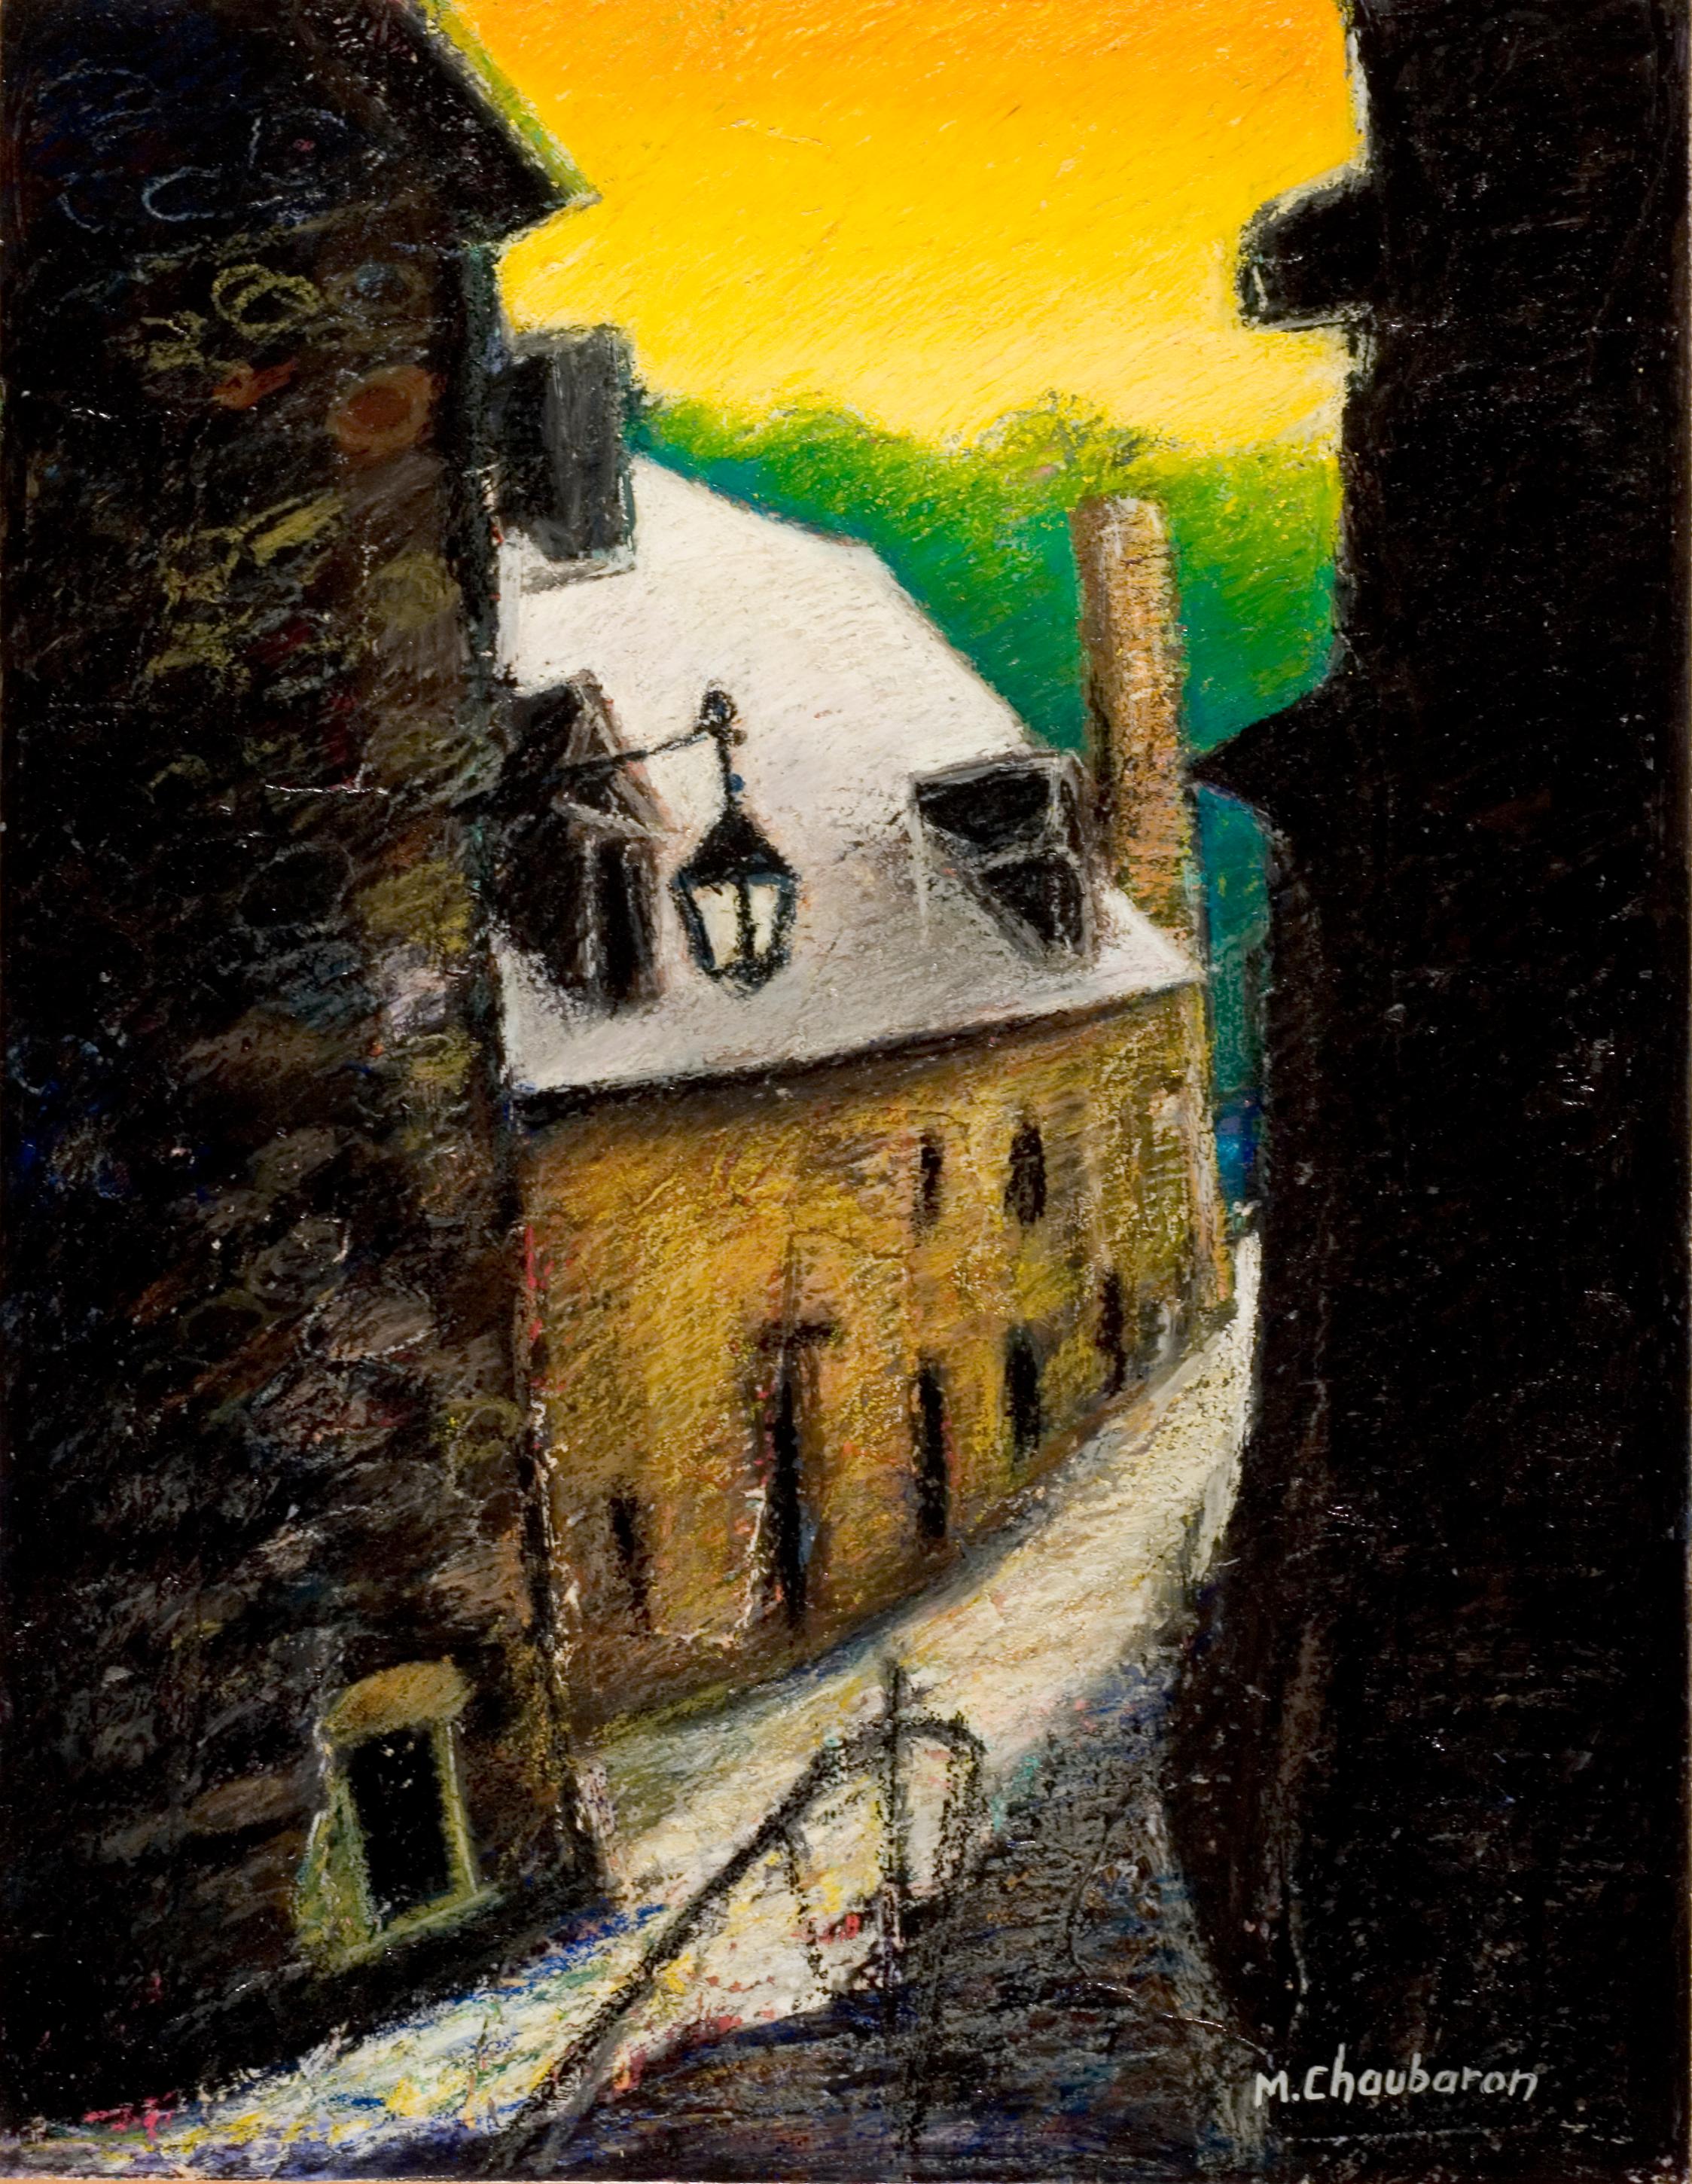 Marc Chaubaron Figurative Painting - Small French Village Empty Street with Stone Houses and Orange Sky Oil Pastel